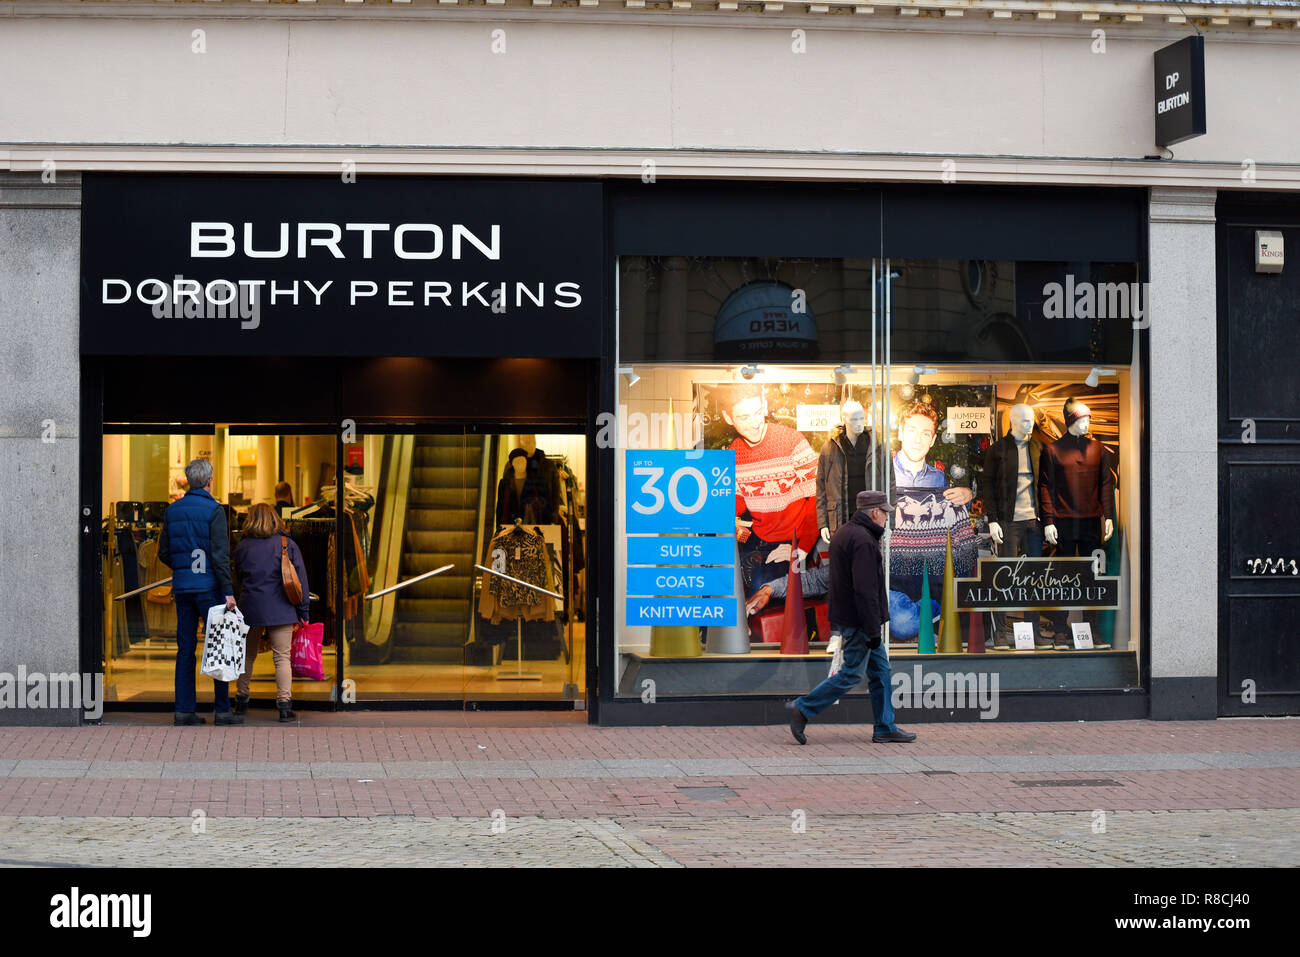 Burton Dorothy Perkins shop store in High Street, Southend on Sea, Essex,  UK with 30% sale sign in window display. Christmas. Shoppers Stock Photo -  Alamy